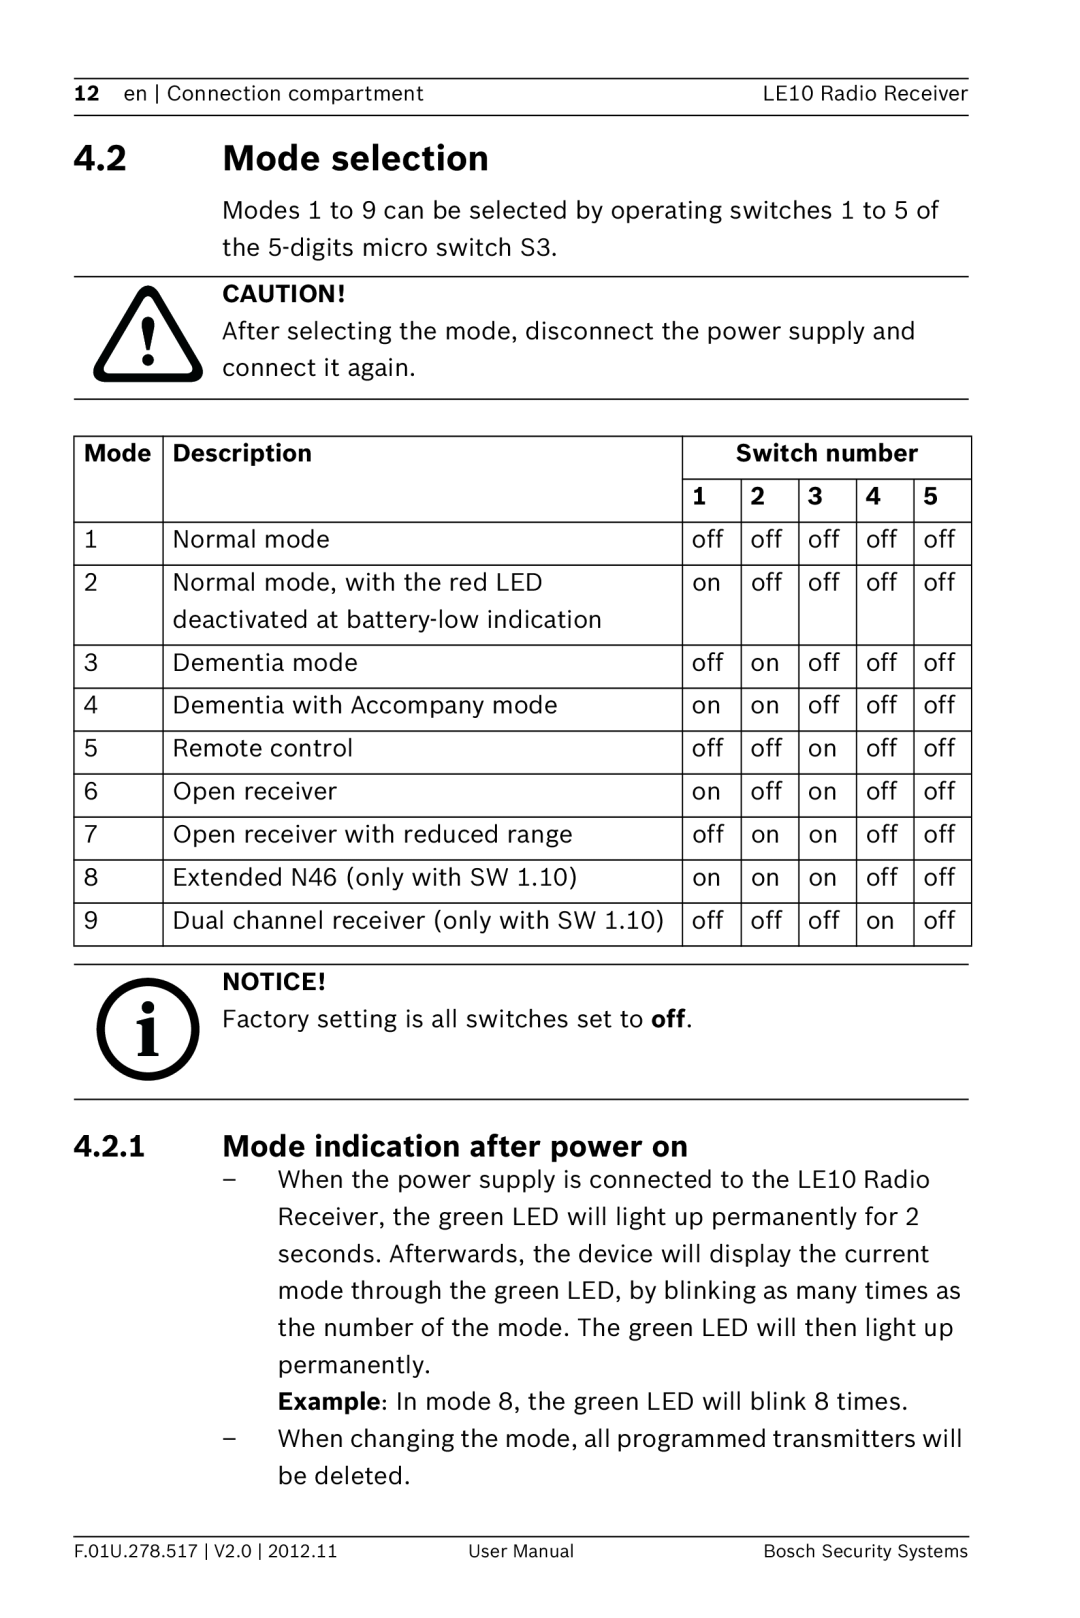 Bosch Appliances LE10 user manual 4.2Mode selection, 4.2.1Mode indication after power on, Switch number, Description 